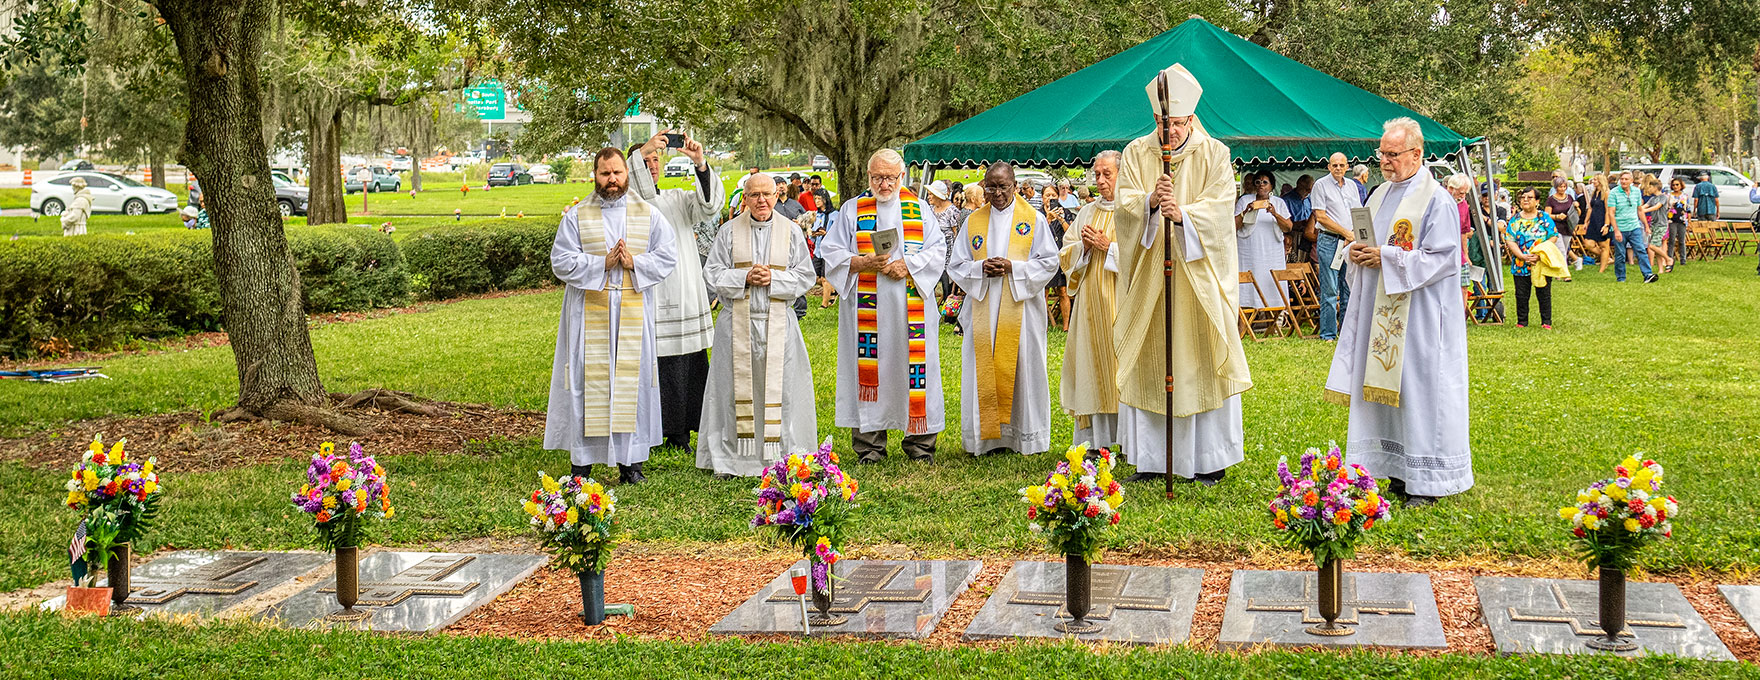 Most Reverend Gregory L. Parkes and priests and deacon of the Diocese of St. Petersburg pray at the graves of departed fellow priests on All Souls' Day at Calvary Catholic Cemetery in Clearwater, Fla.